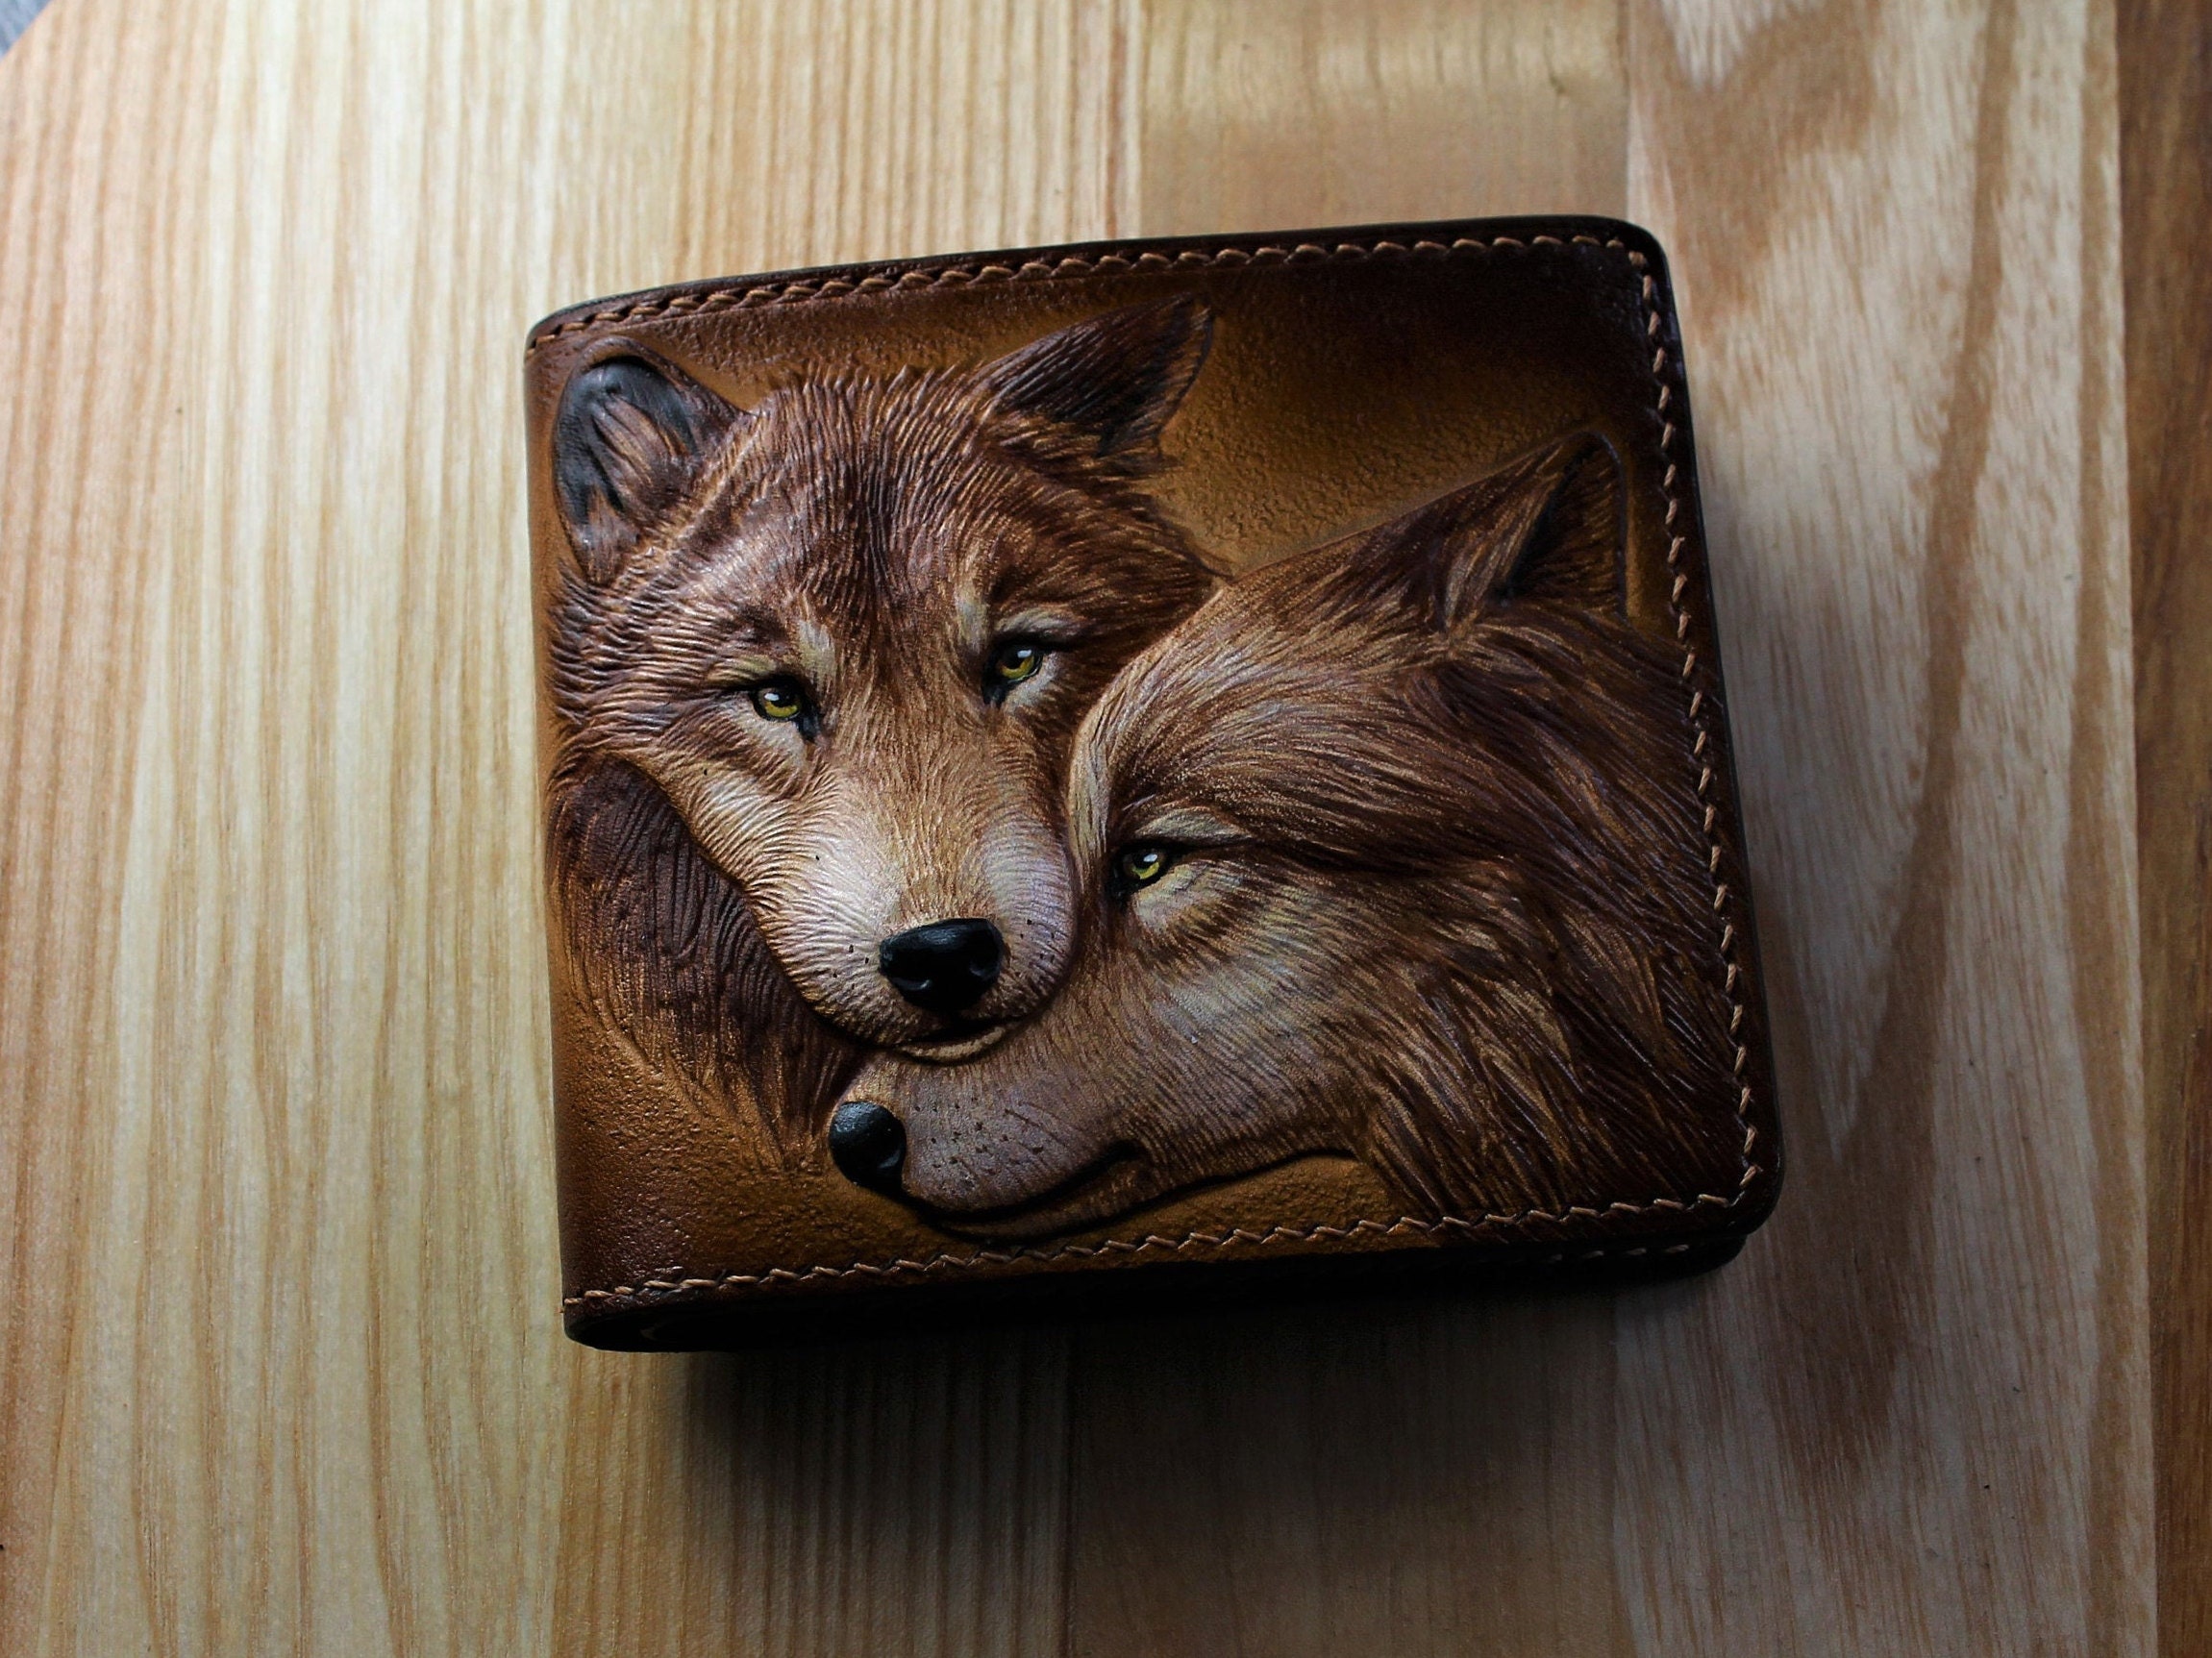 Leather Wallet Hand Tooled Wallet, Raccoon Pocket Hand-Carved